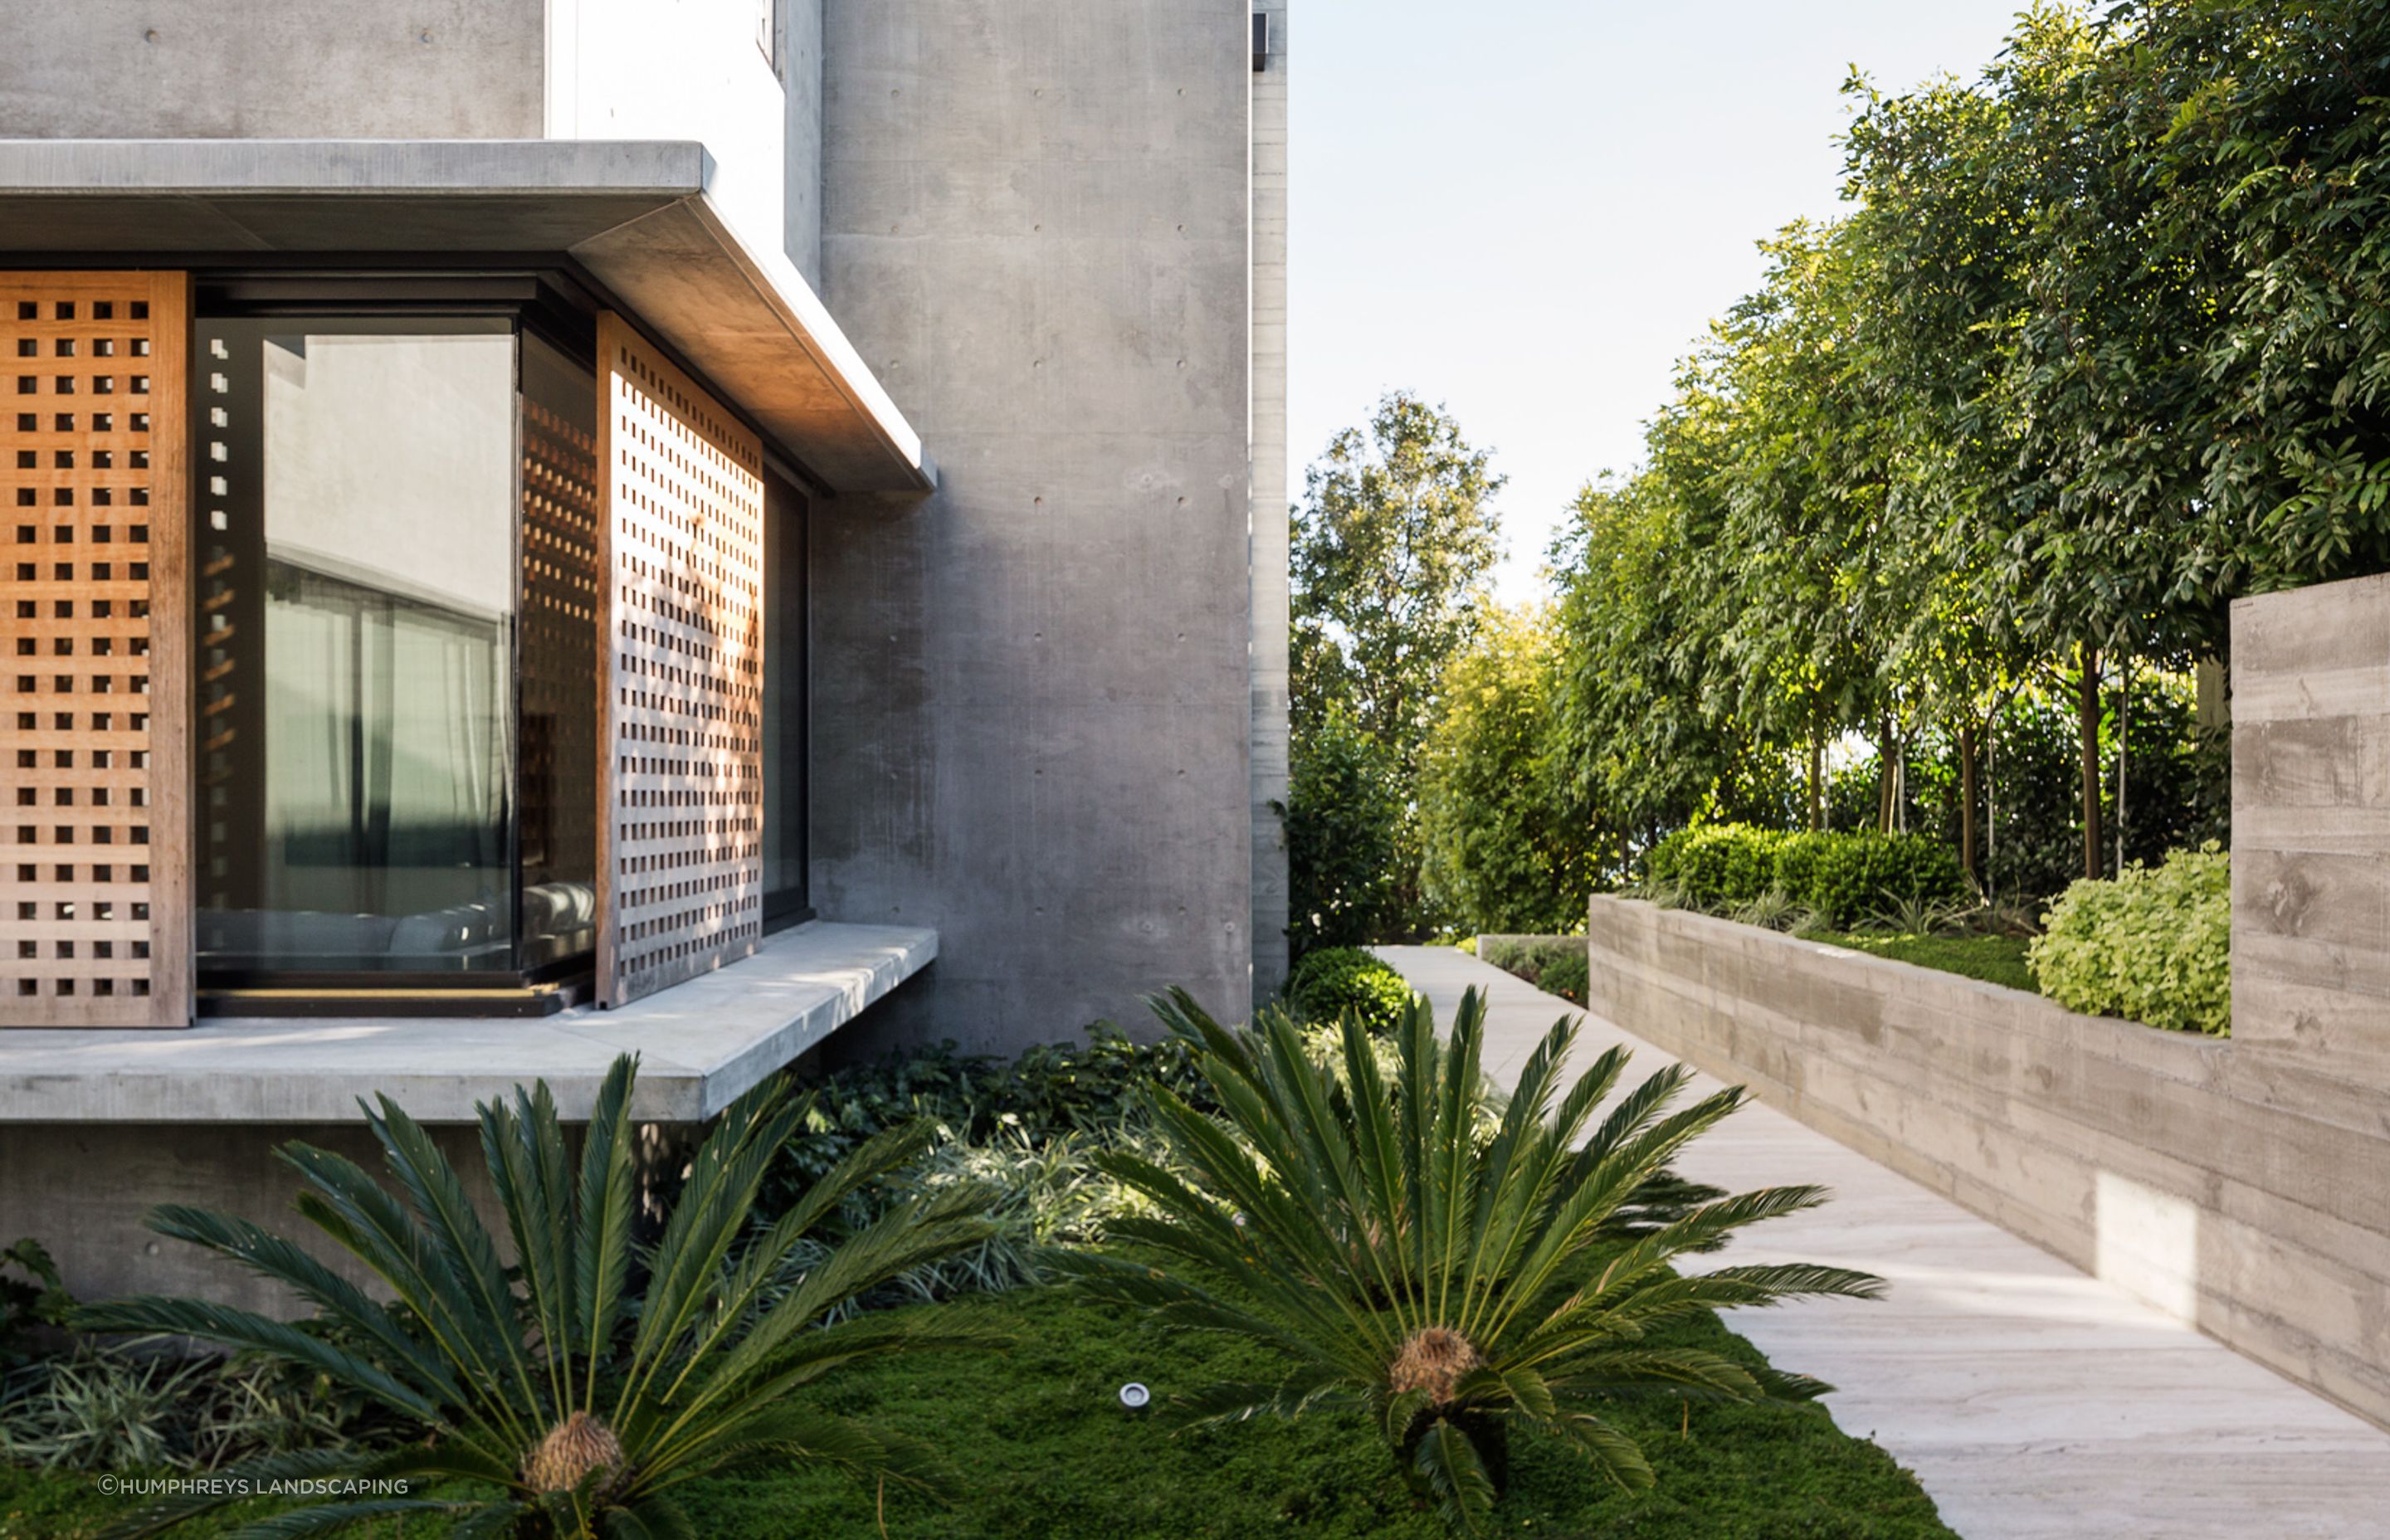 A bold contrast of building and landscaping materials has a striking impact on one and all.